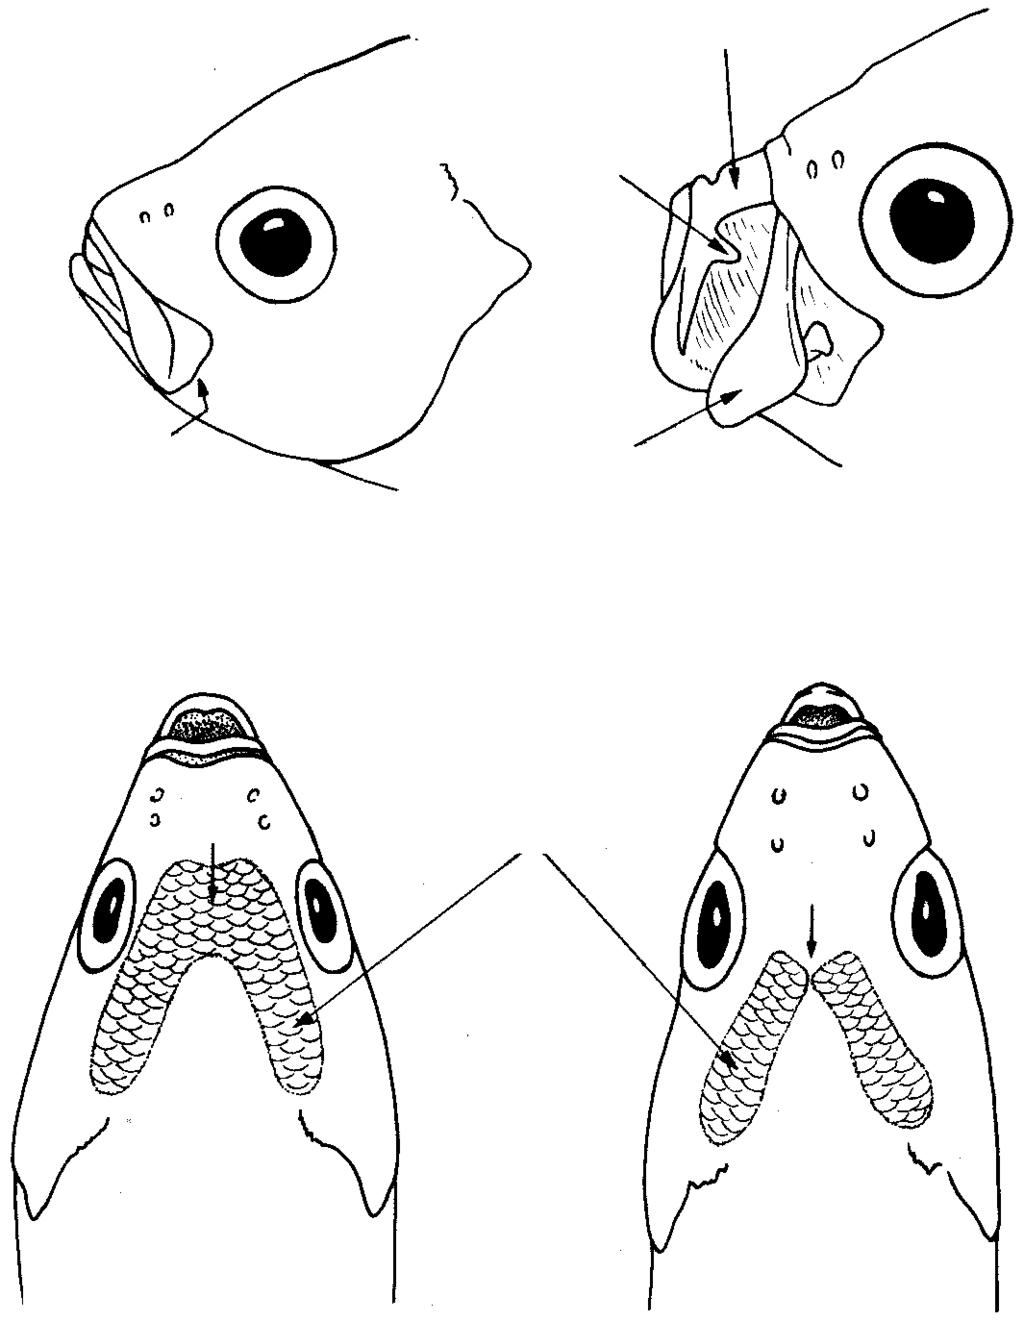 Dorsal fin usually with 10 spines and 14 soft rays; supratemporal band of scales interrupted at dorsal midline by a thin scaleless zone (Fig. 19b); tips of caudal lobes with a blackish blotch (Fig.